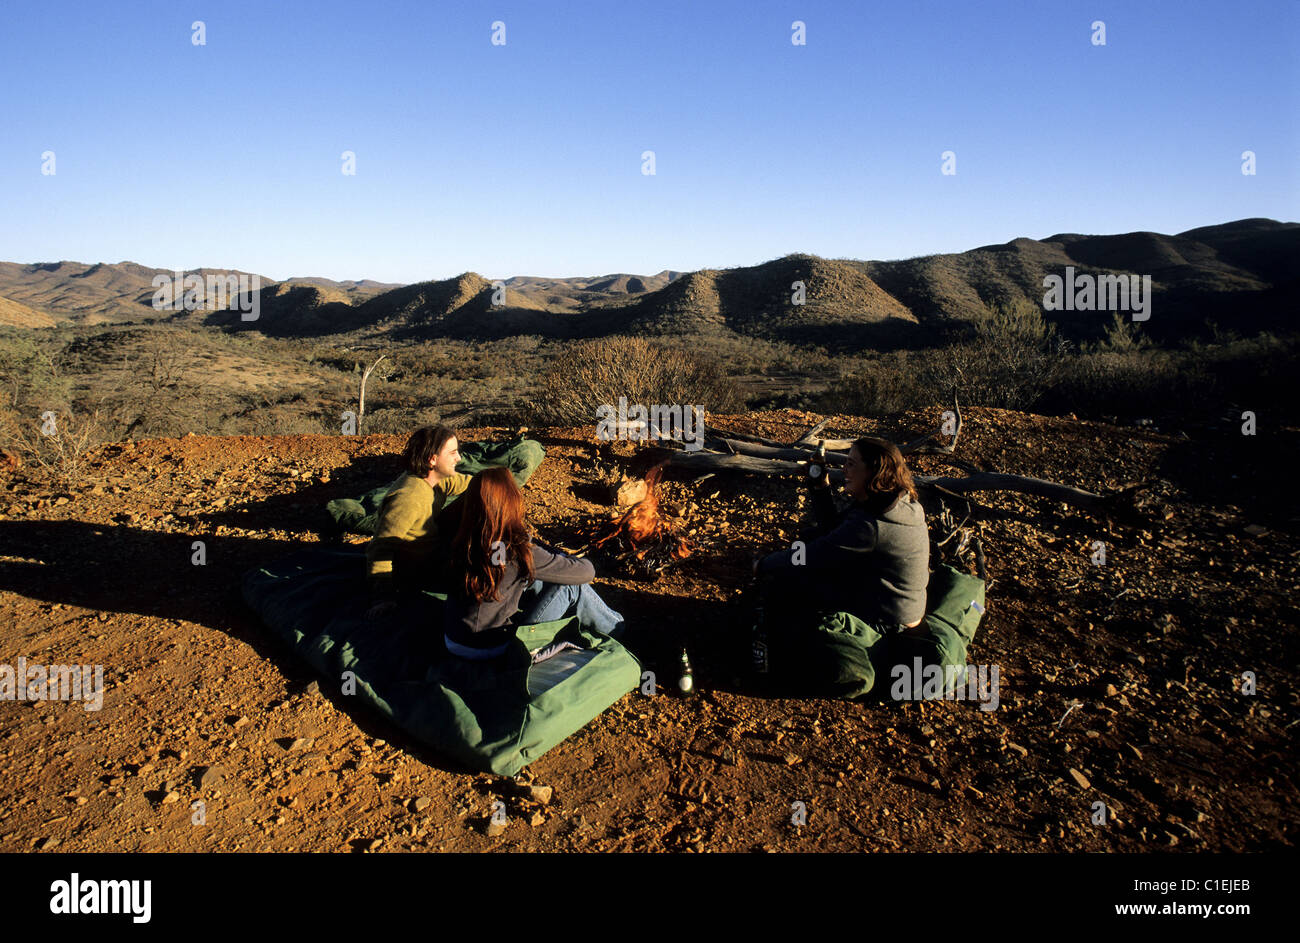 Australia, South Australia, Flinders Ranges, Arkaroola, young backpackers and their swags Stock Photo